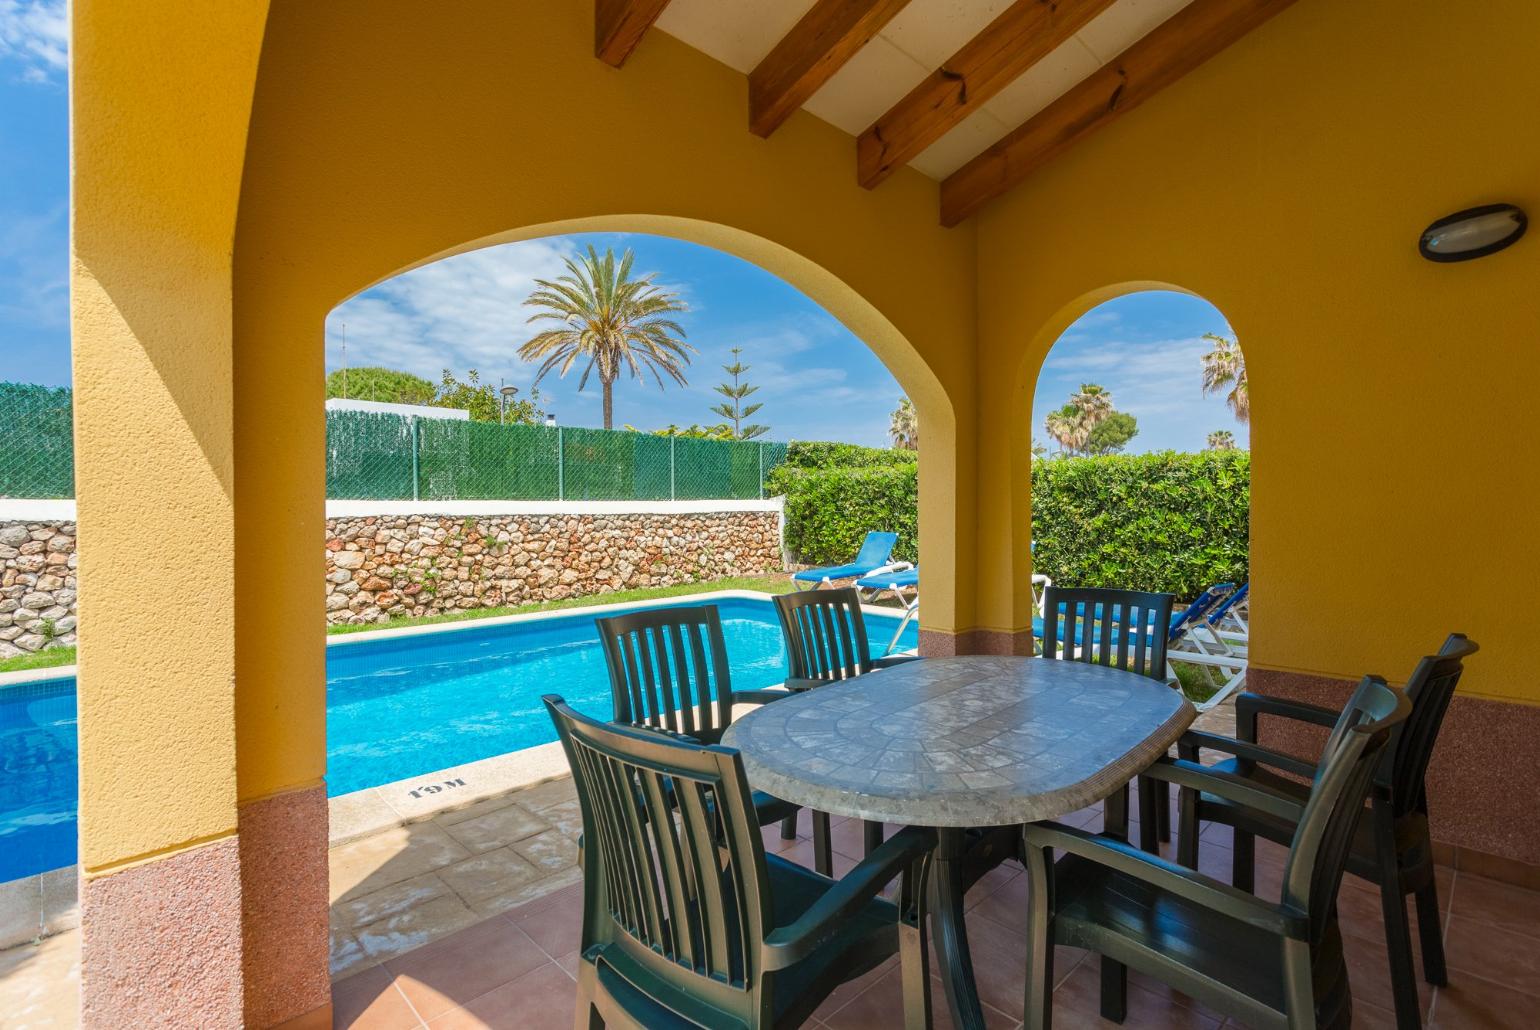 Beautiful villa with private pool and sheltered terrace and outdoor dining area